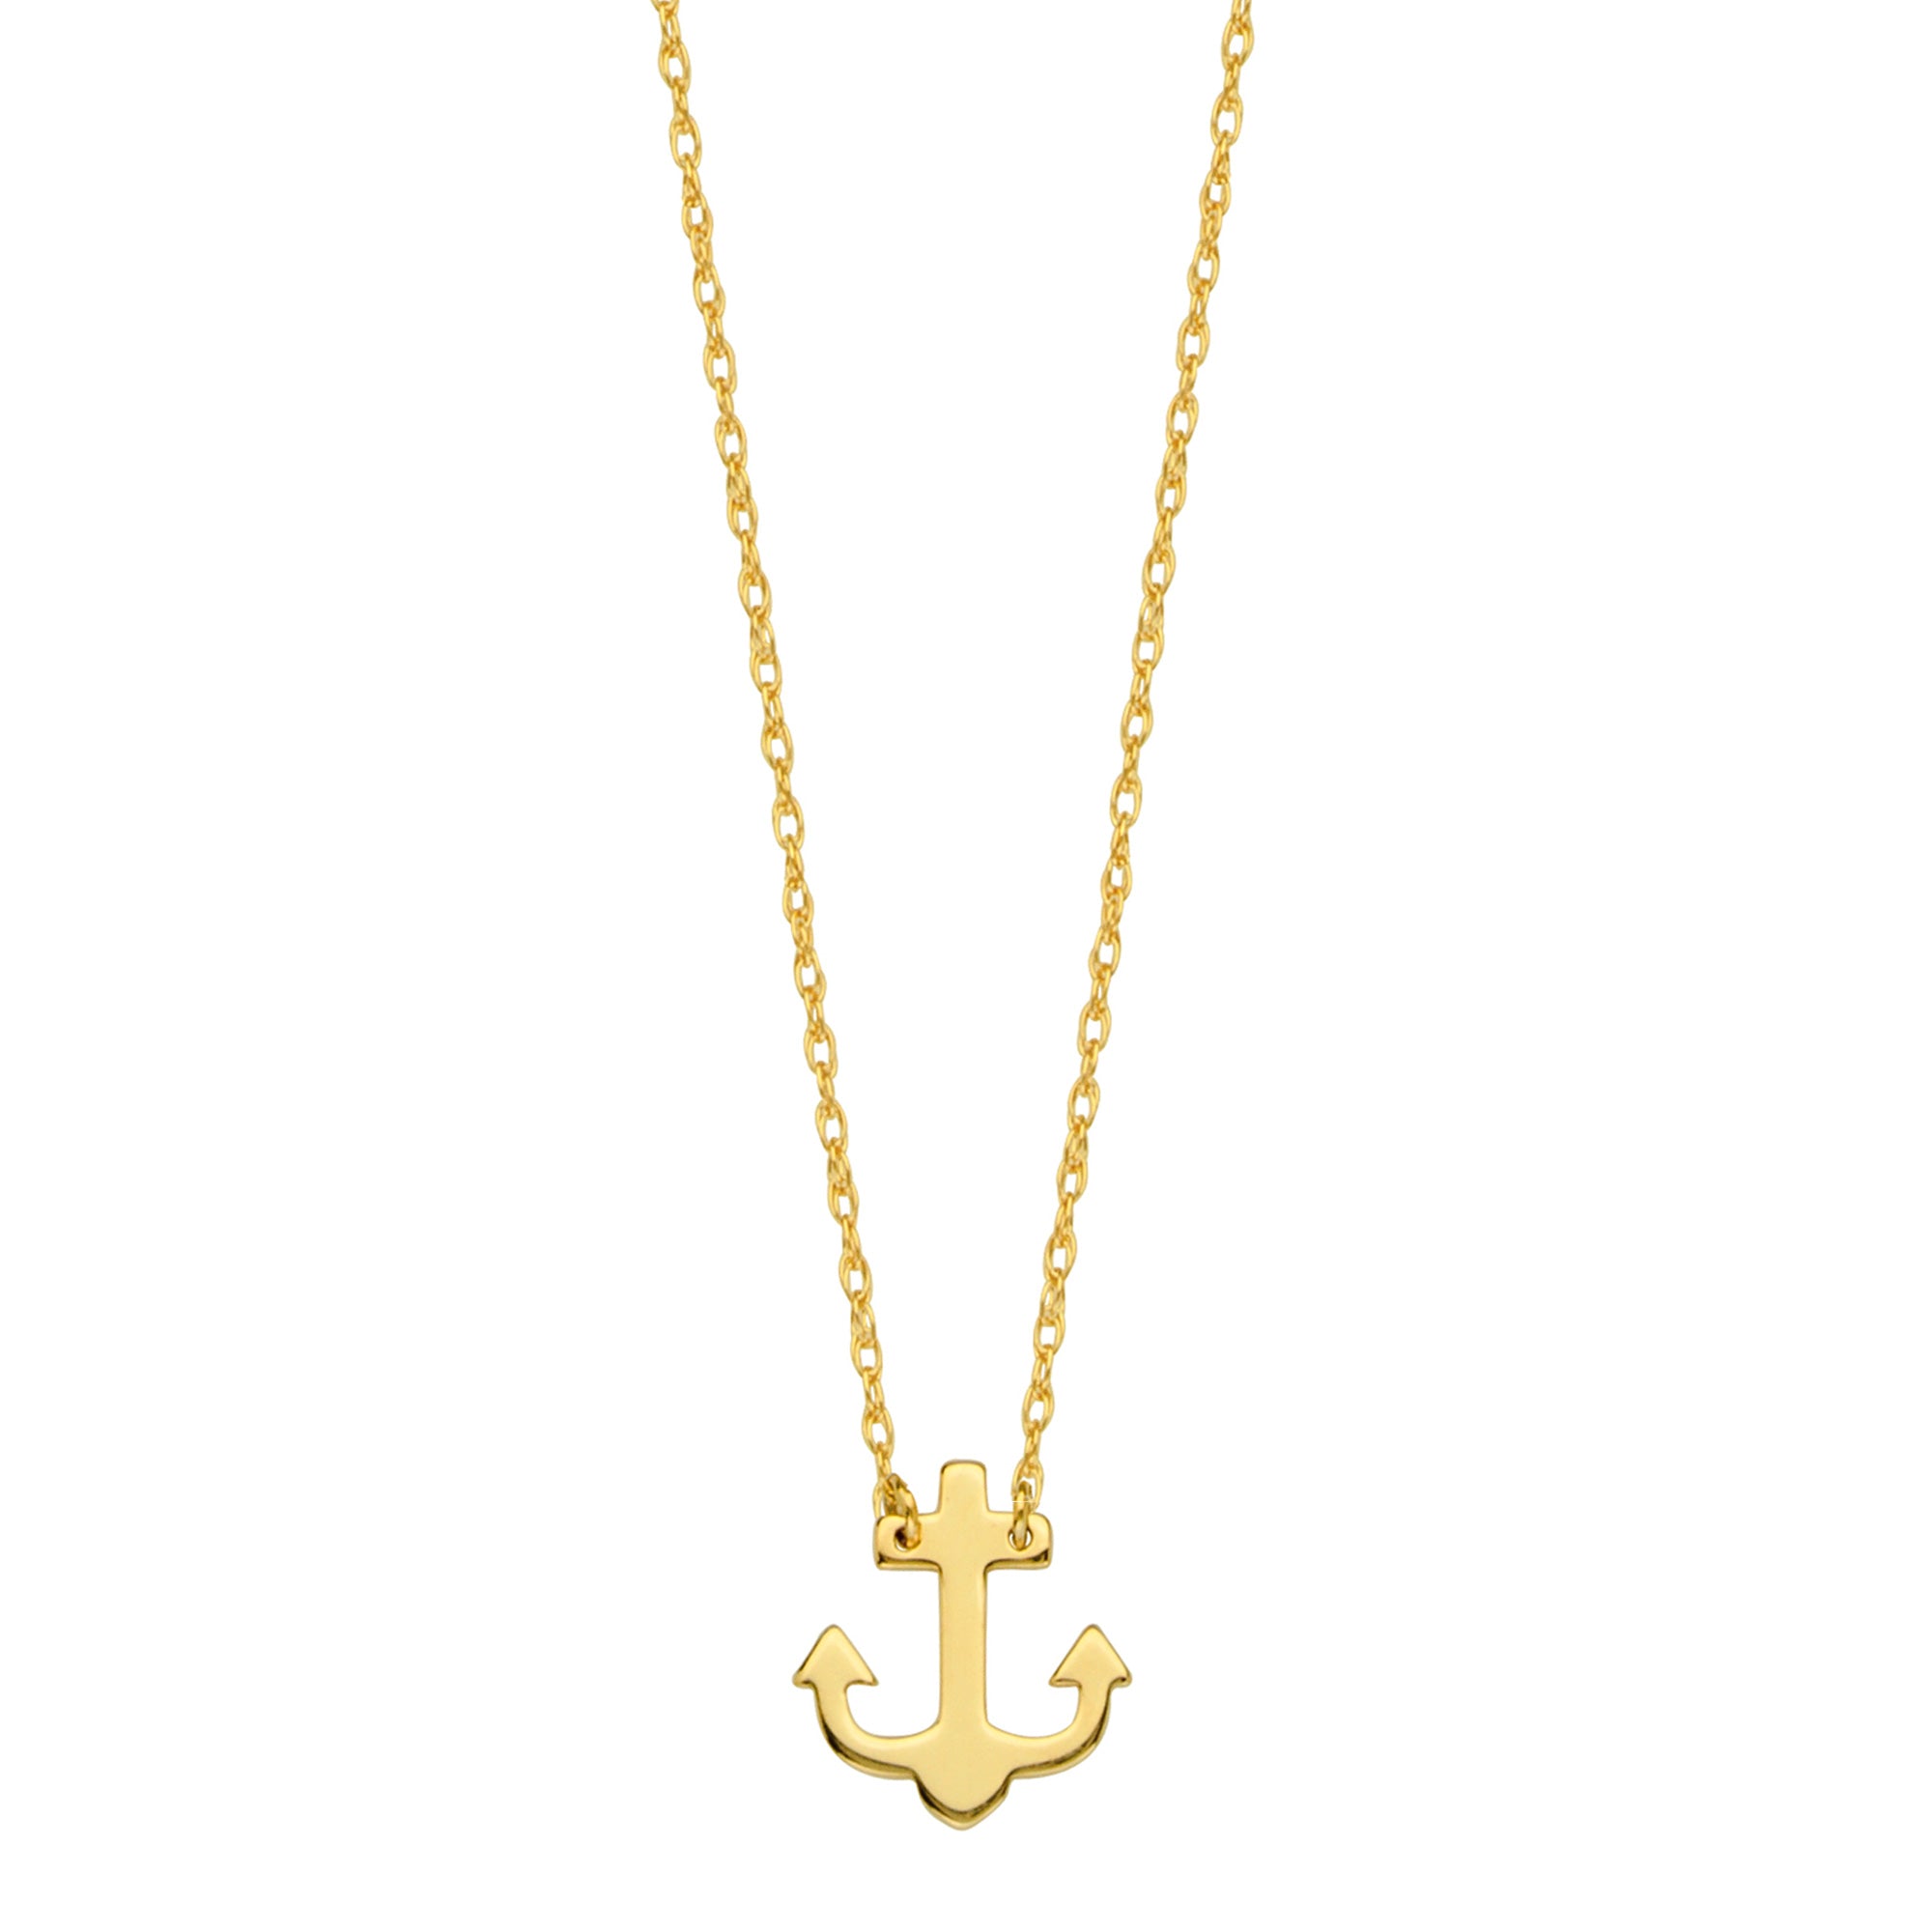 14K Yellow Gold Mini Anchor Pendant Necklace, 16" To 18" Adjustable fine designer jewelry for men and women